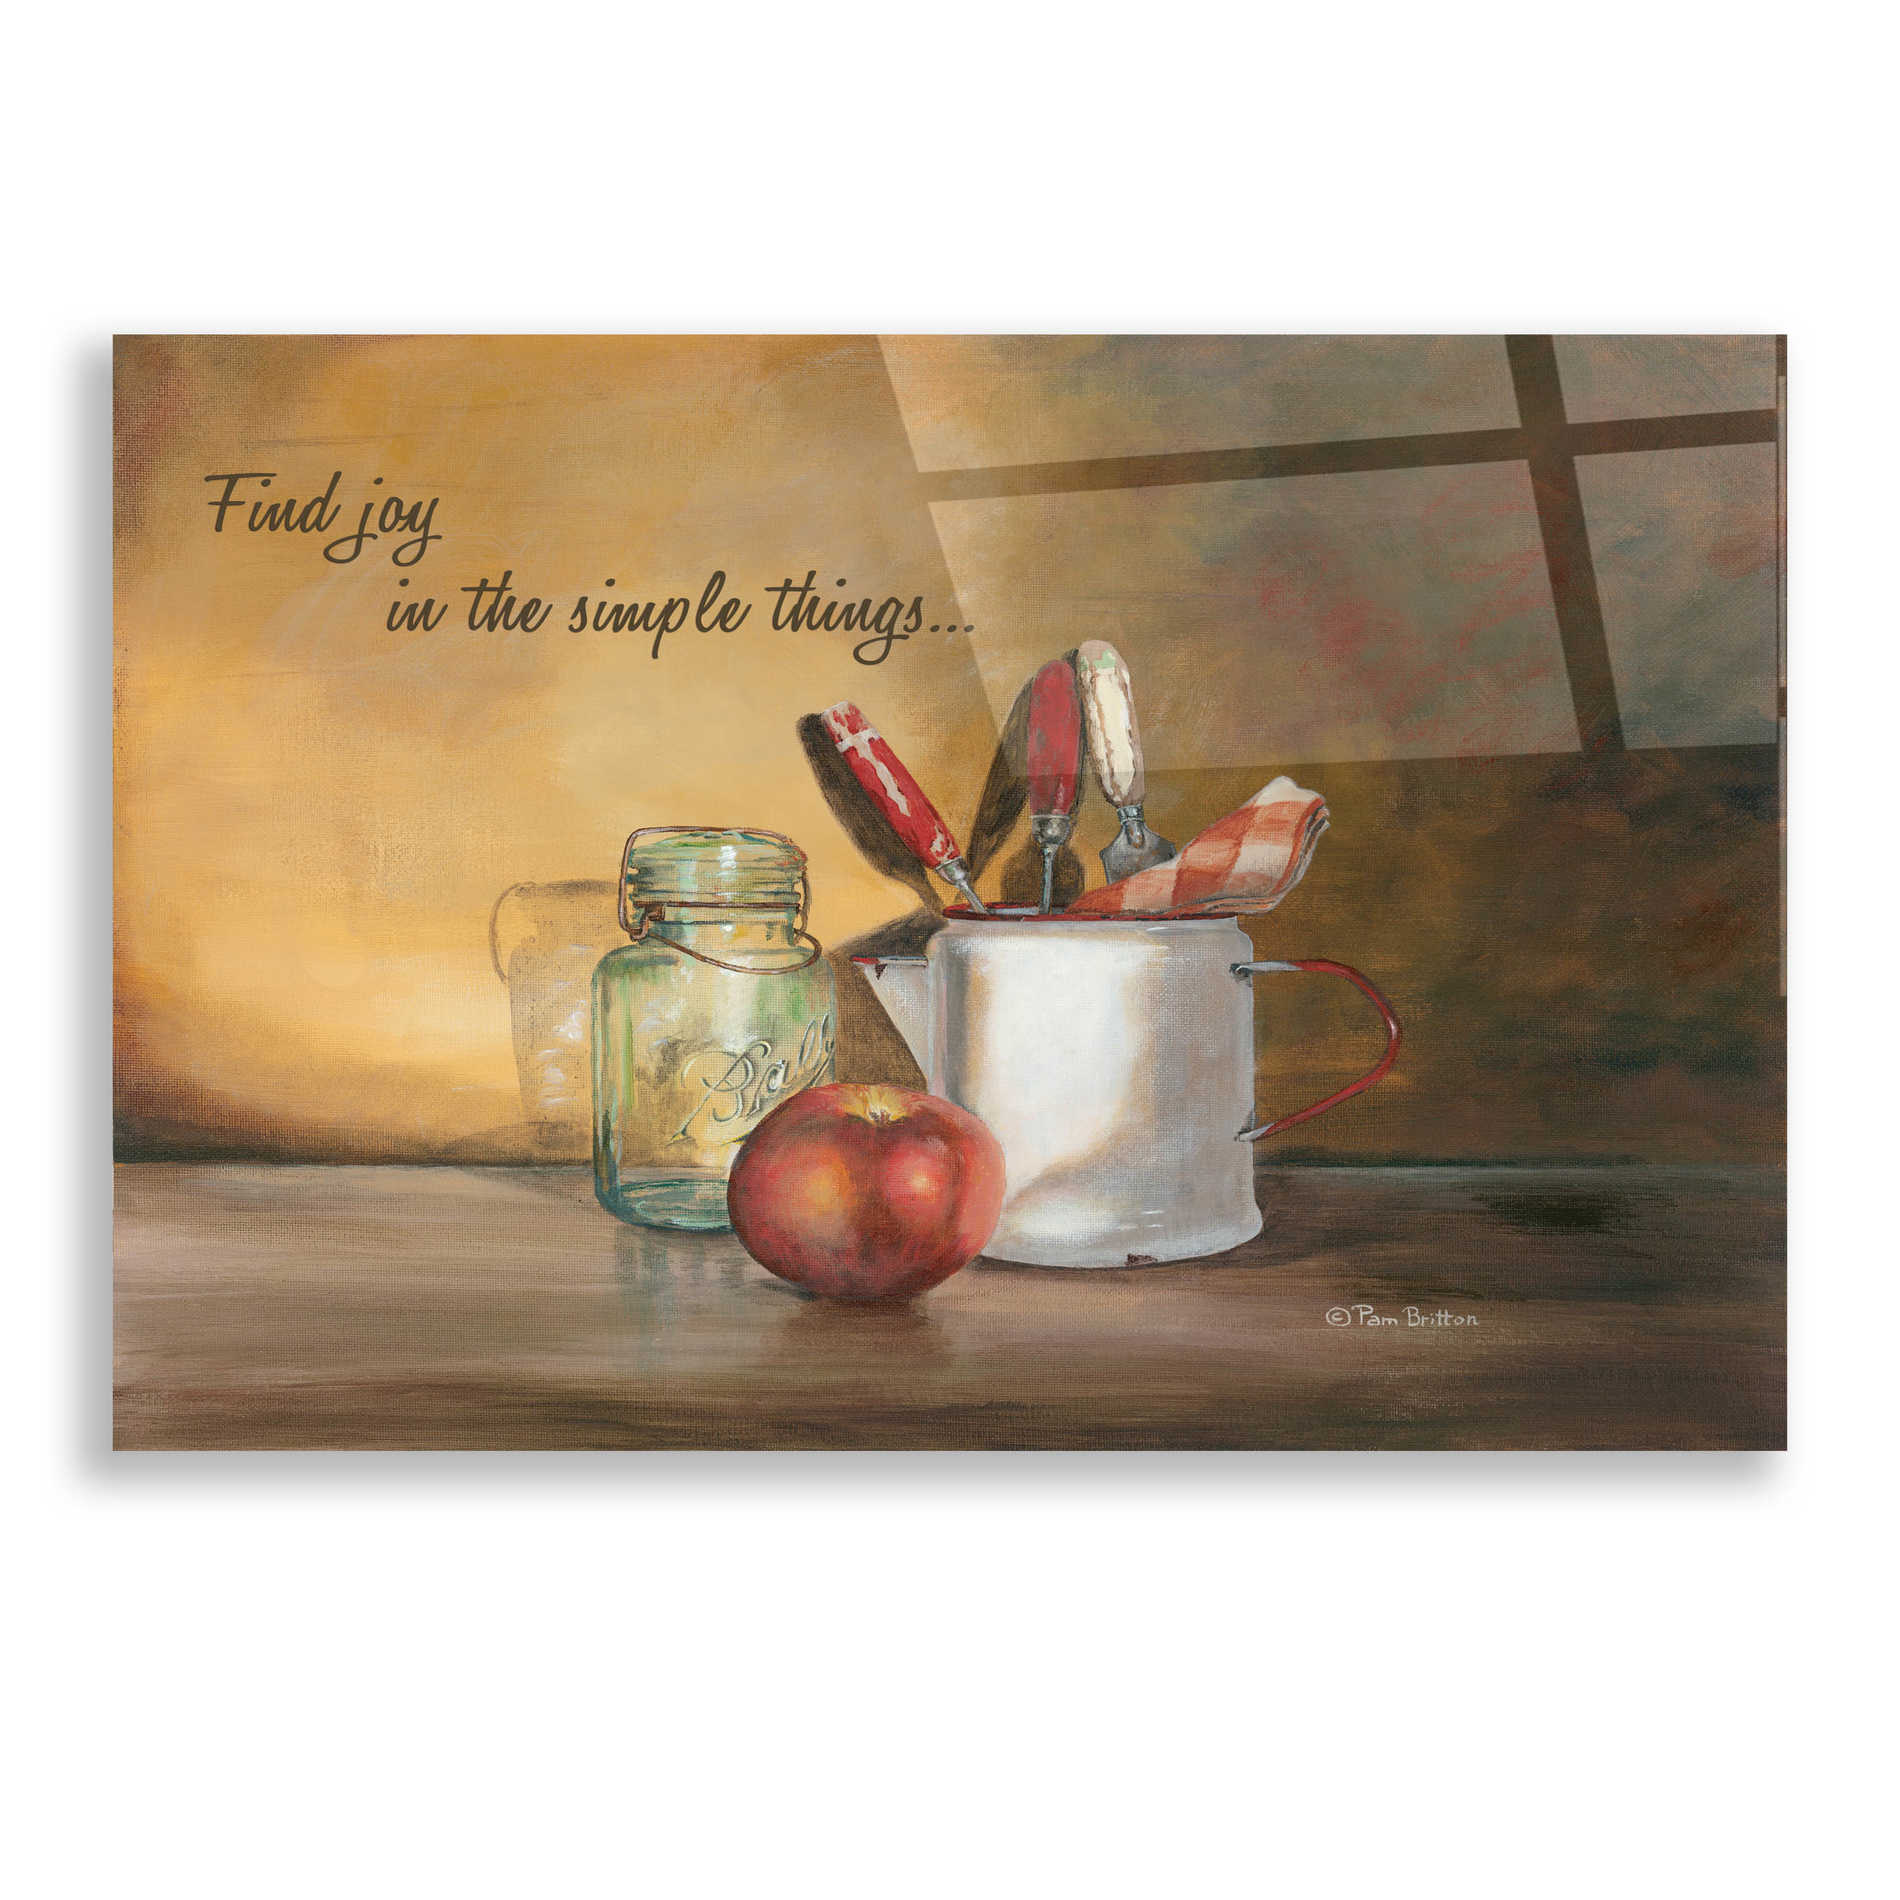 Epic Art 'Find Joy in the Simple Things' by Pam Britton, Acrylic Glass Wall Art,24x16